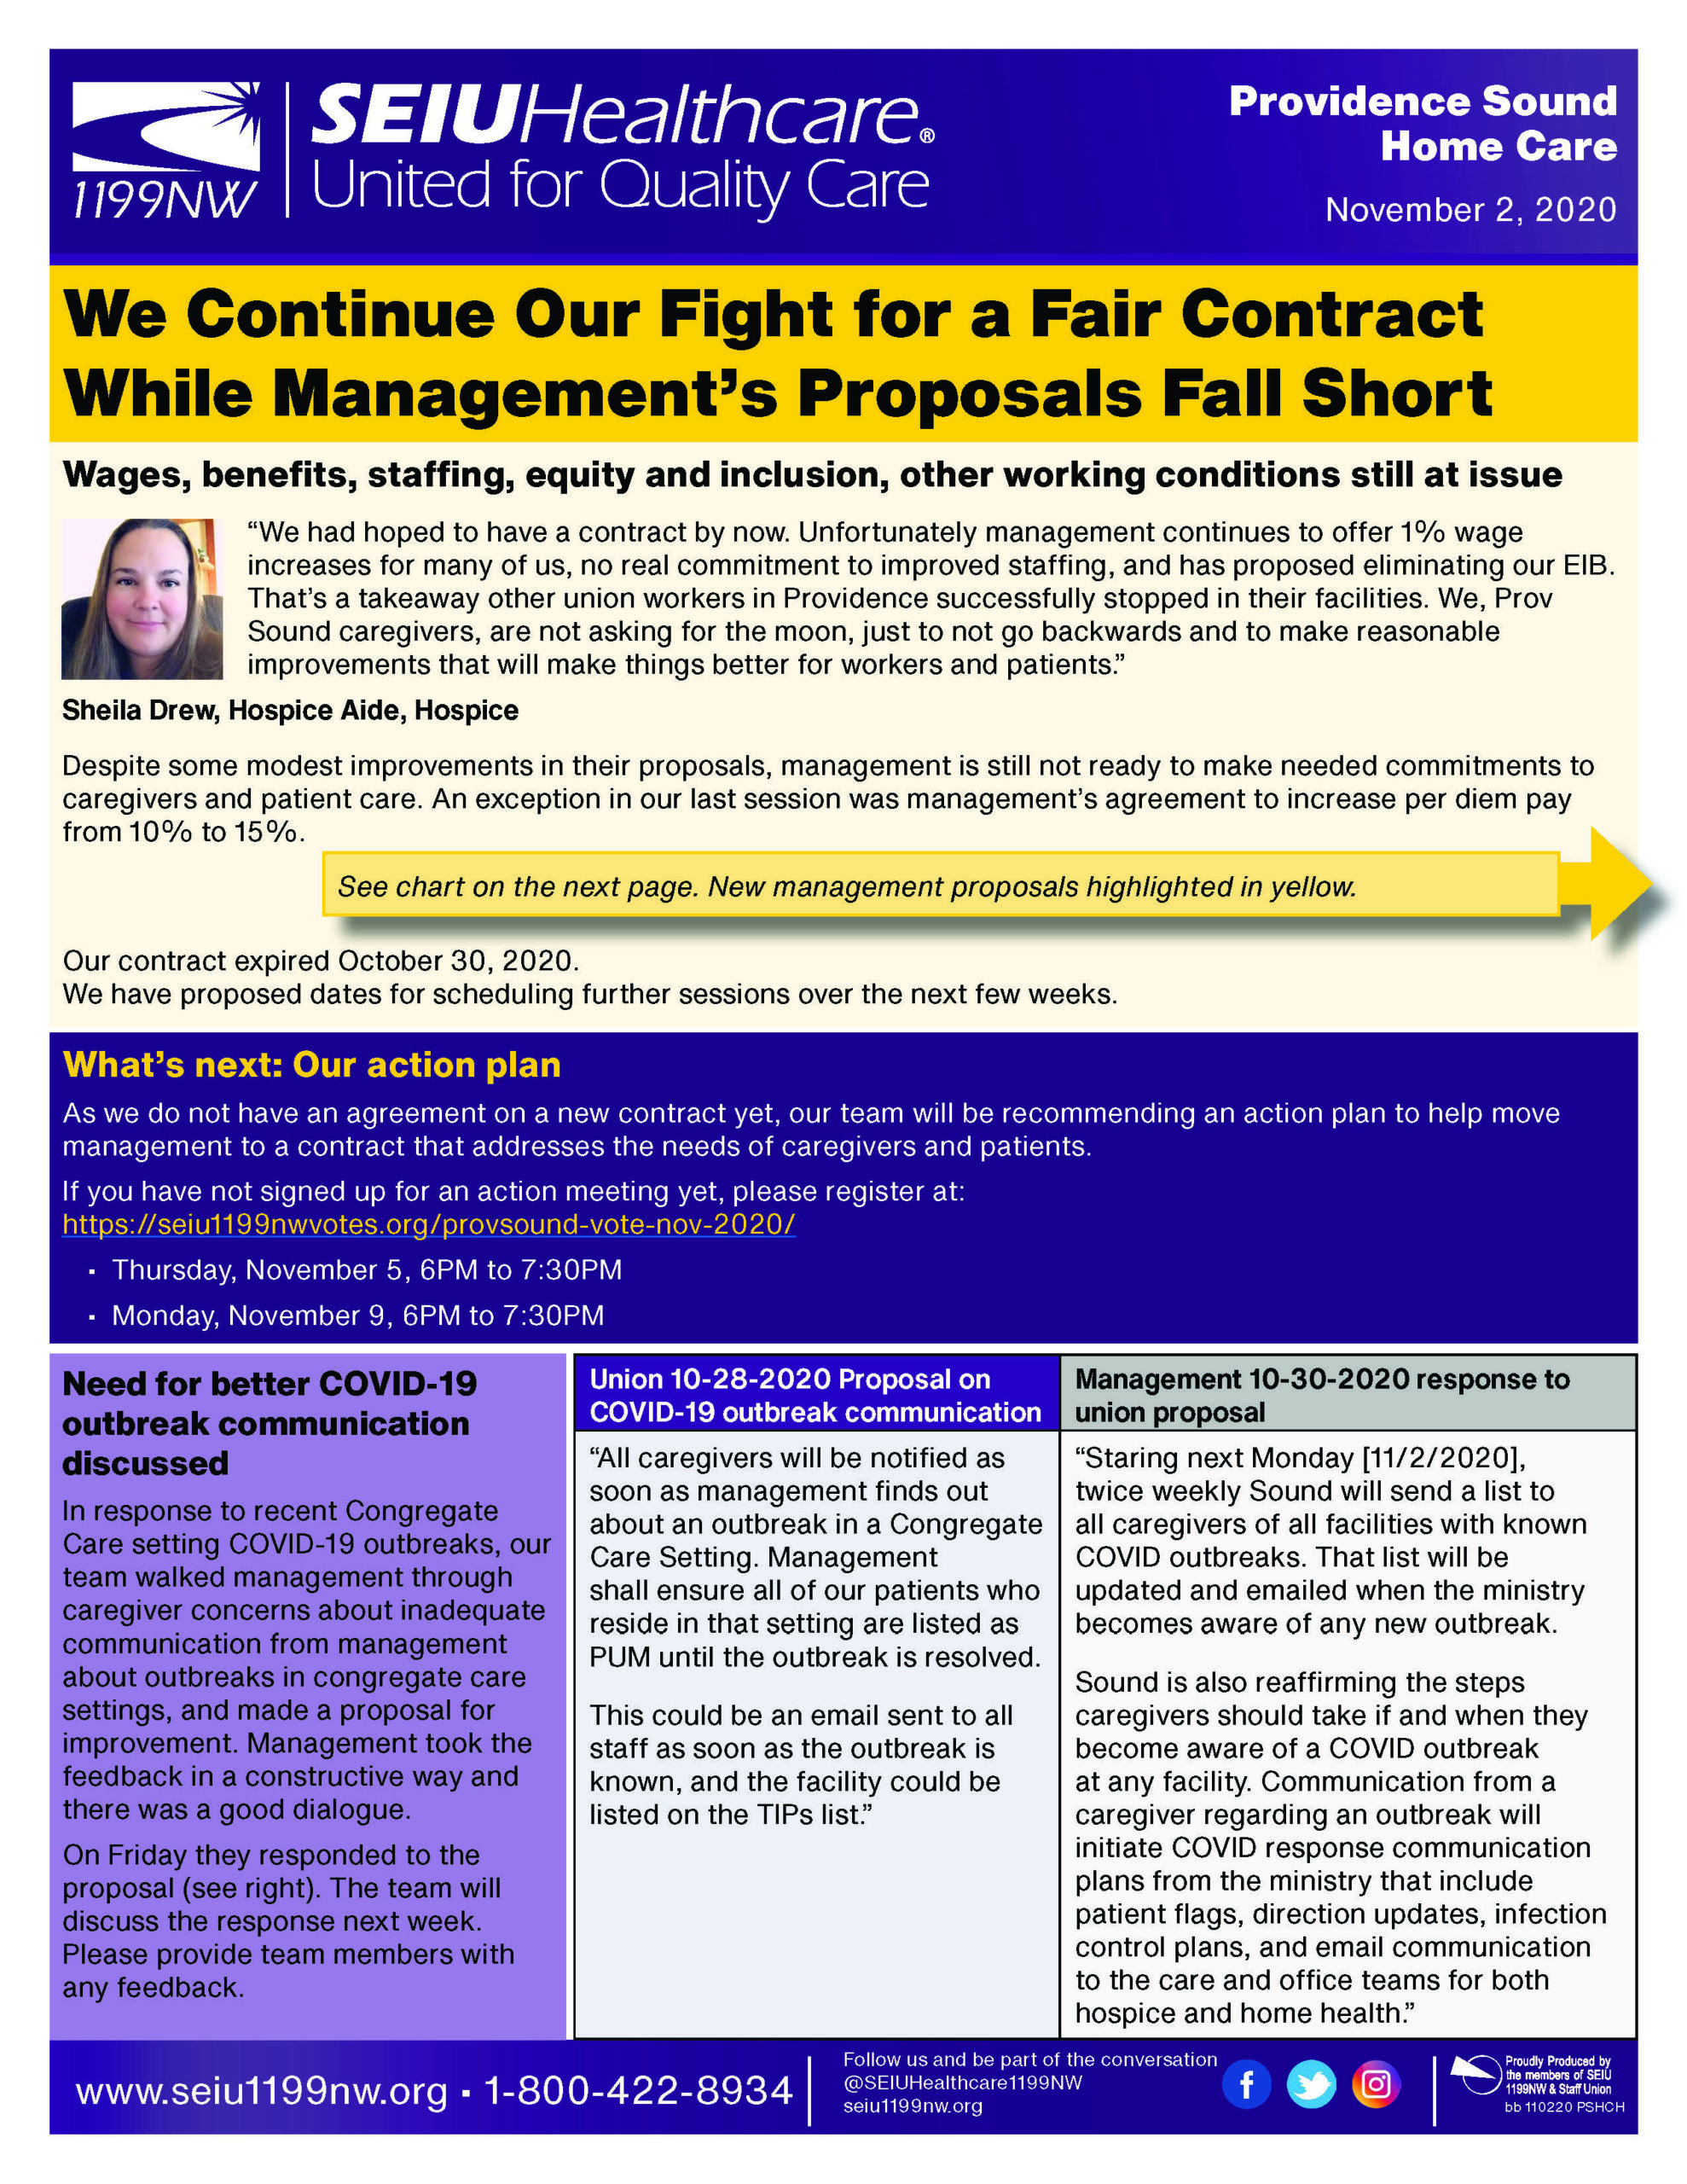 We Continue Our Fight for a Fair Contract While Management’s Proposals Fall Short